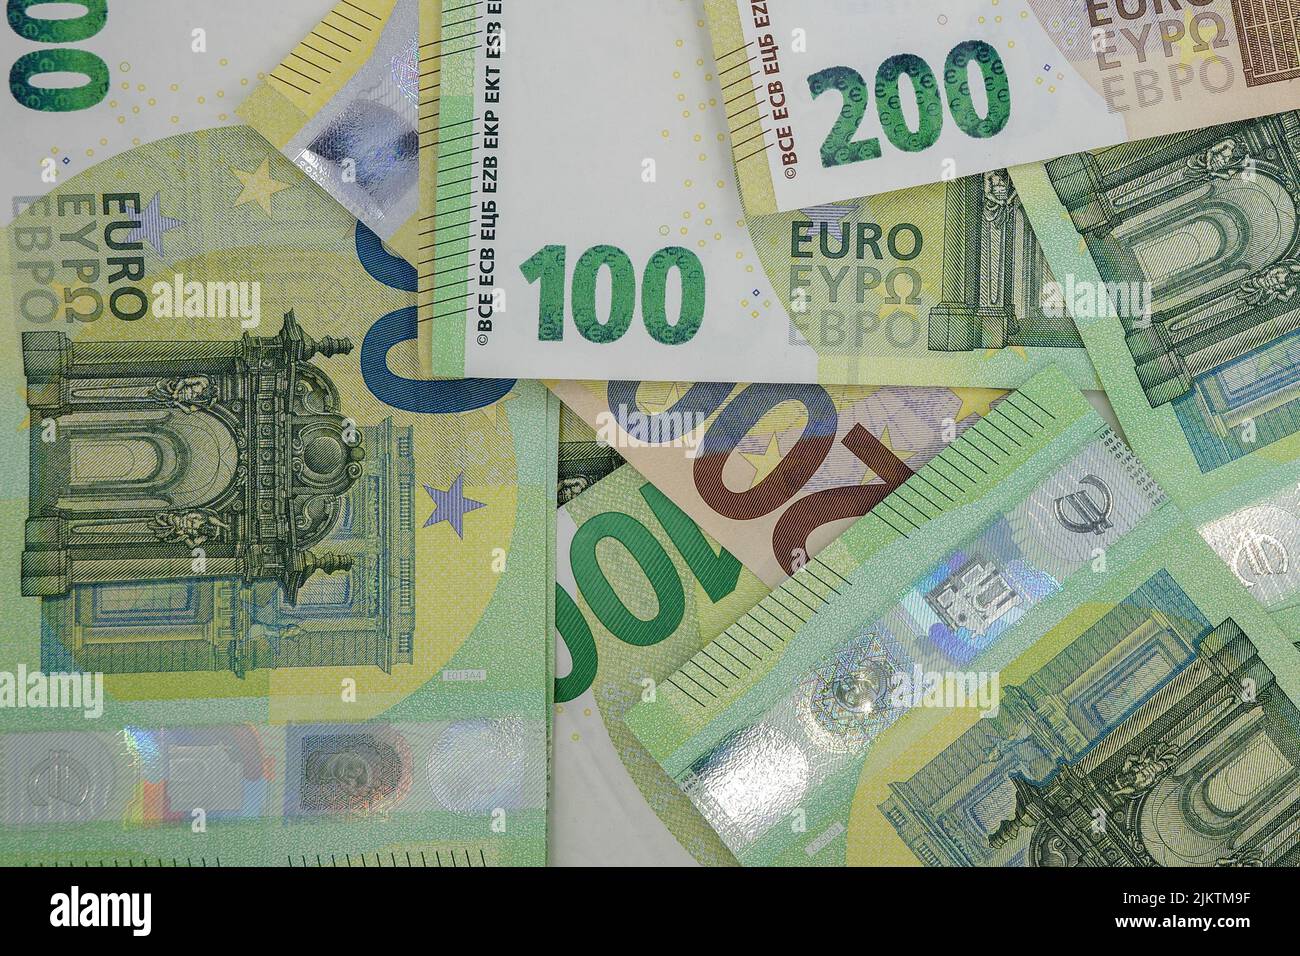 A top view of a pile of 200 and 100 Euro banknotes bills Stock Photo